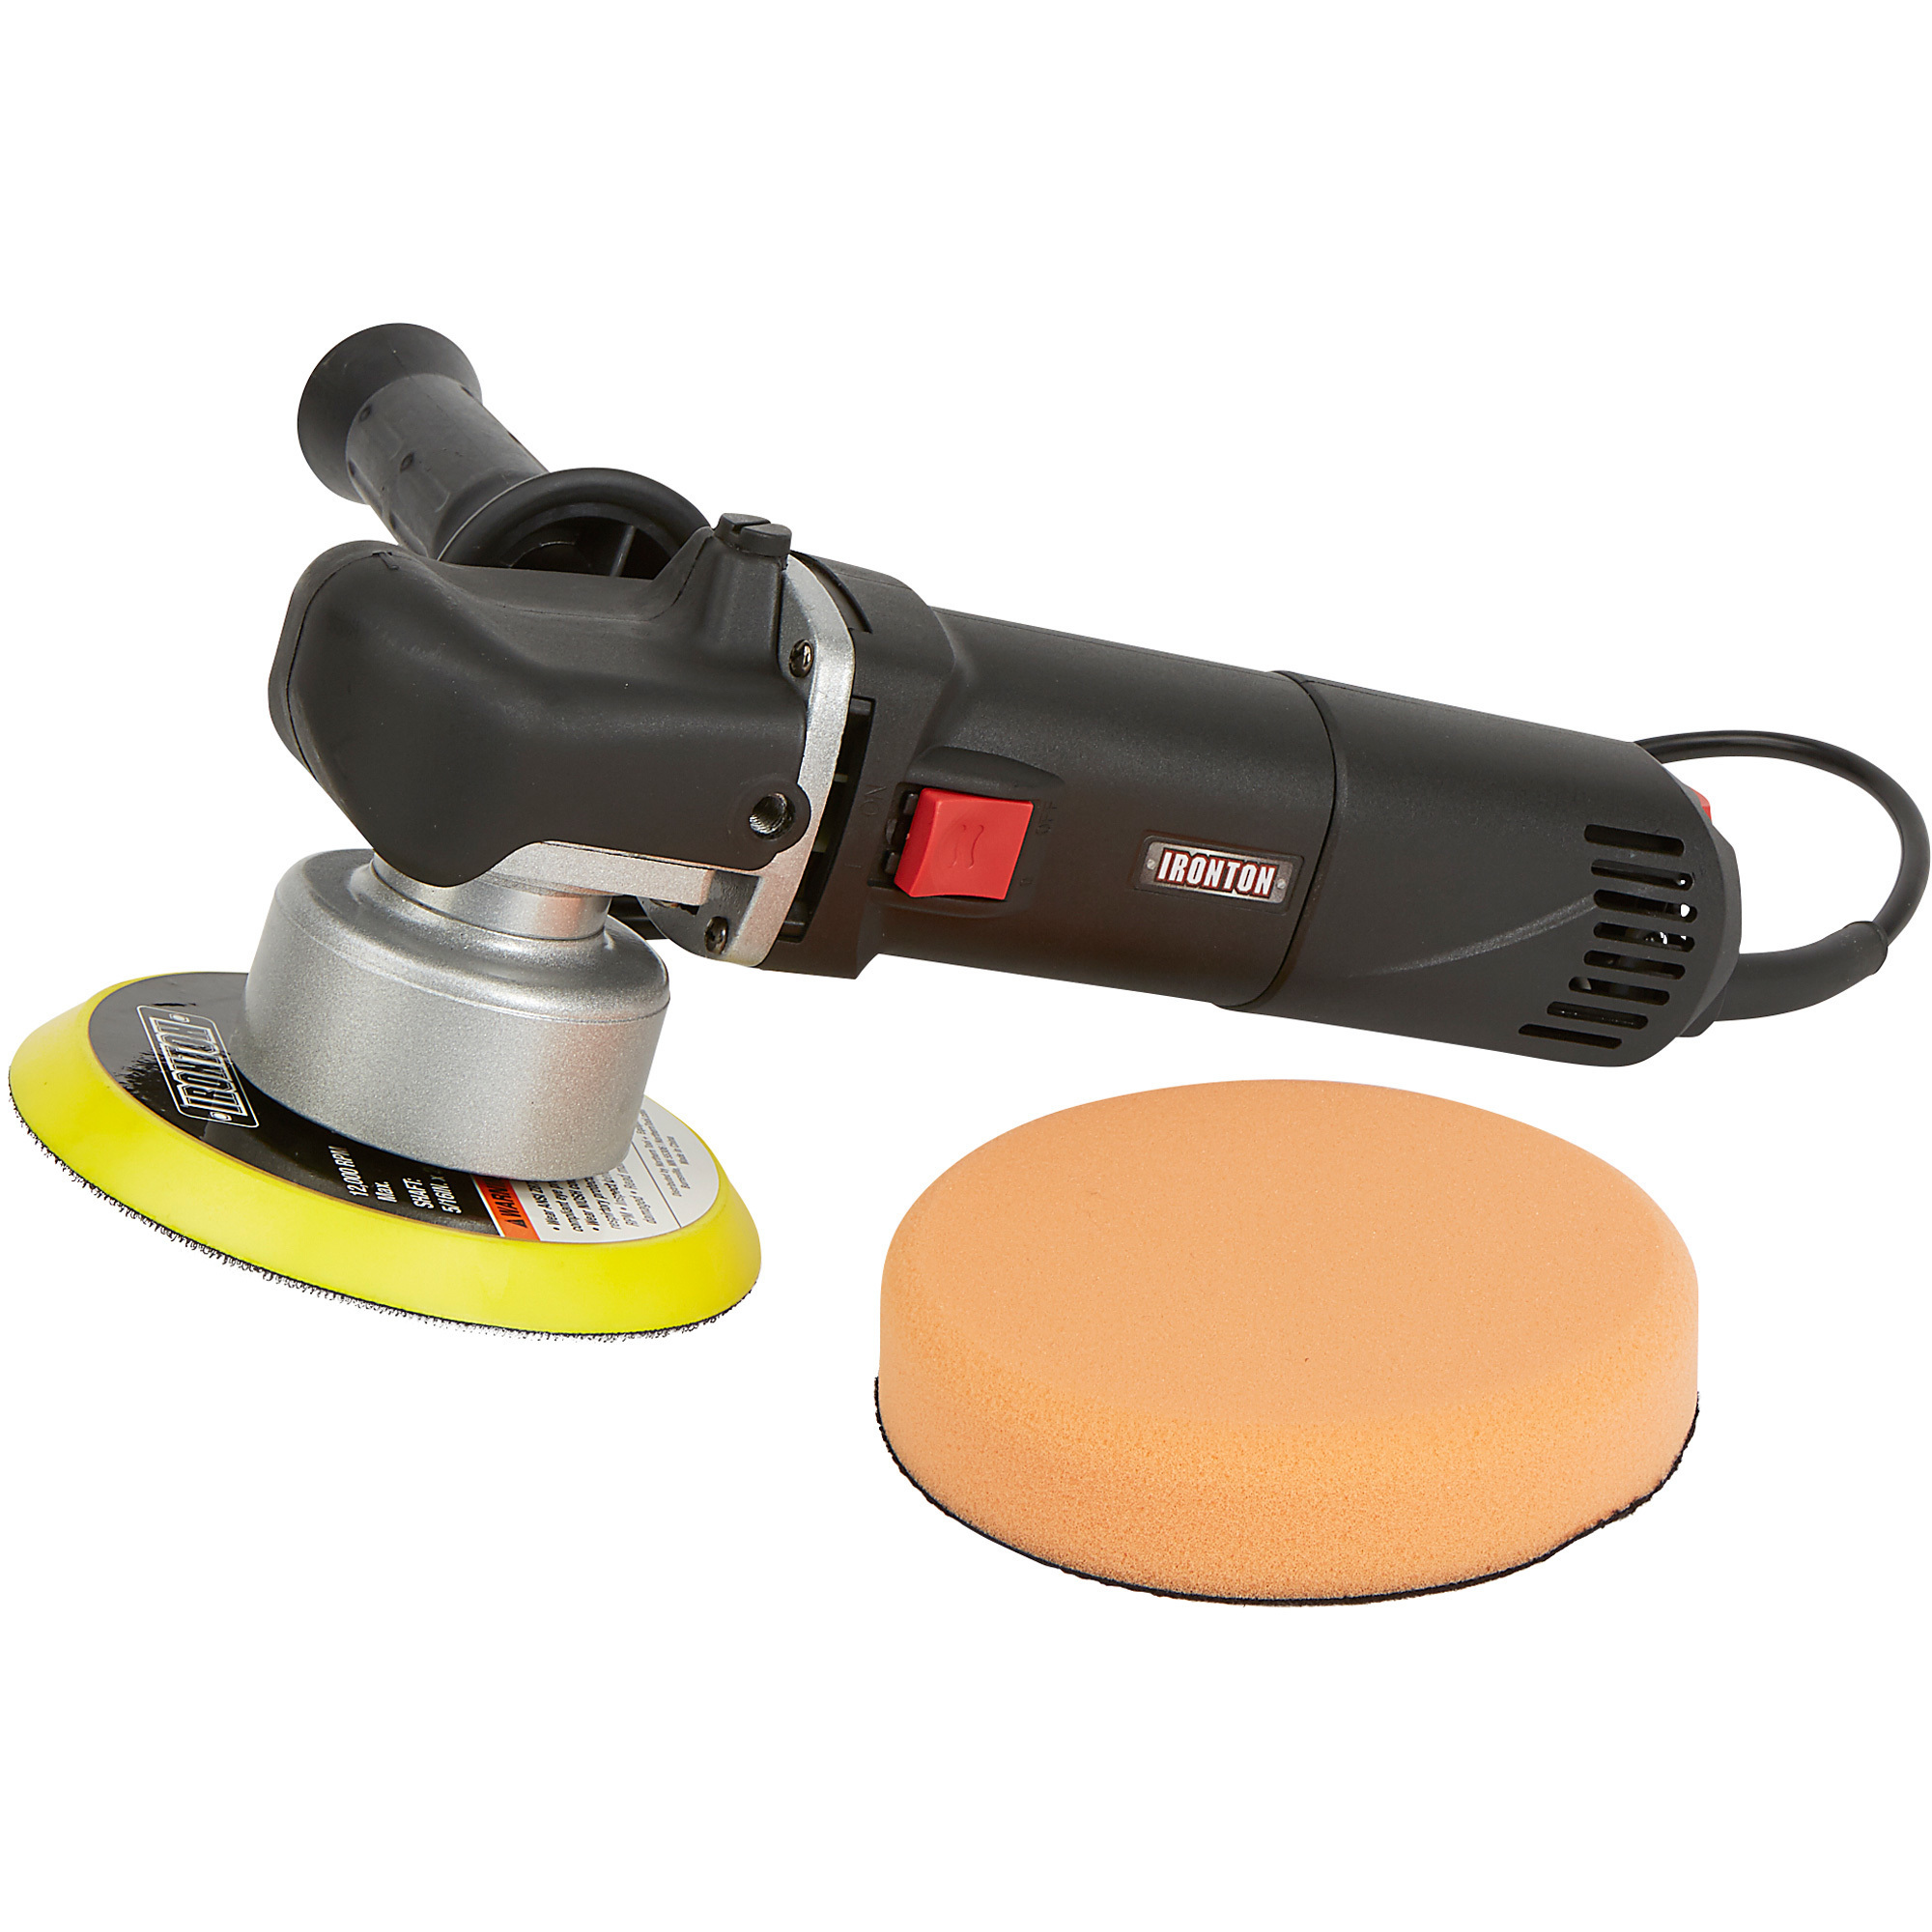 Ironton Dual Action Car Polisher, 5.7 Amp, 6in. Pad | Northern Tool